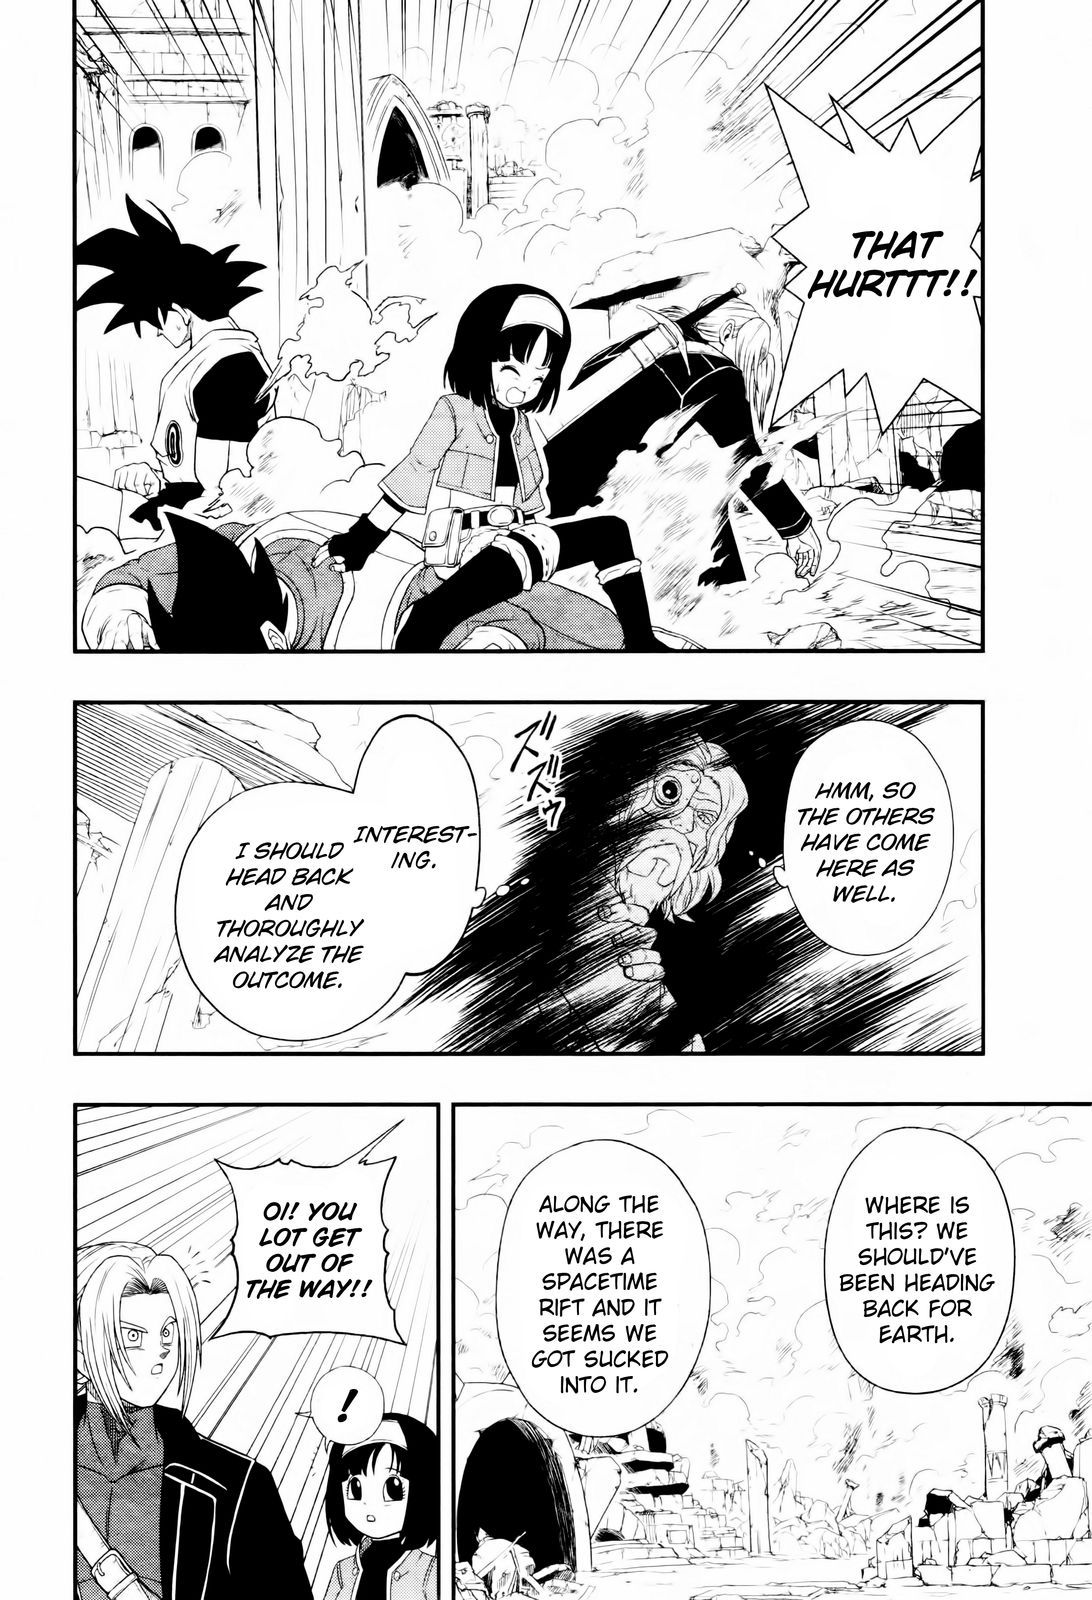 The Latest Chapter of the Super Dragon Ball Heroes: Big Bang